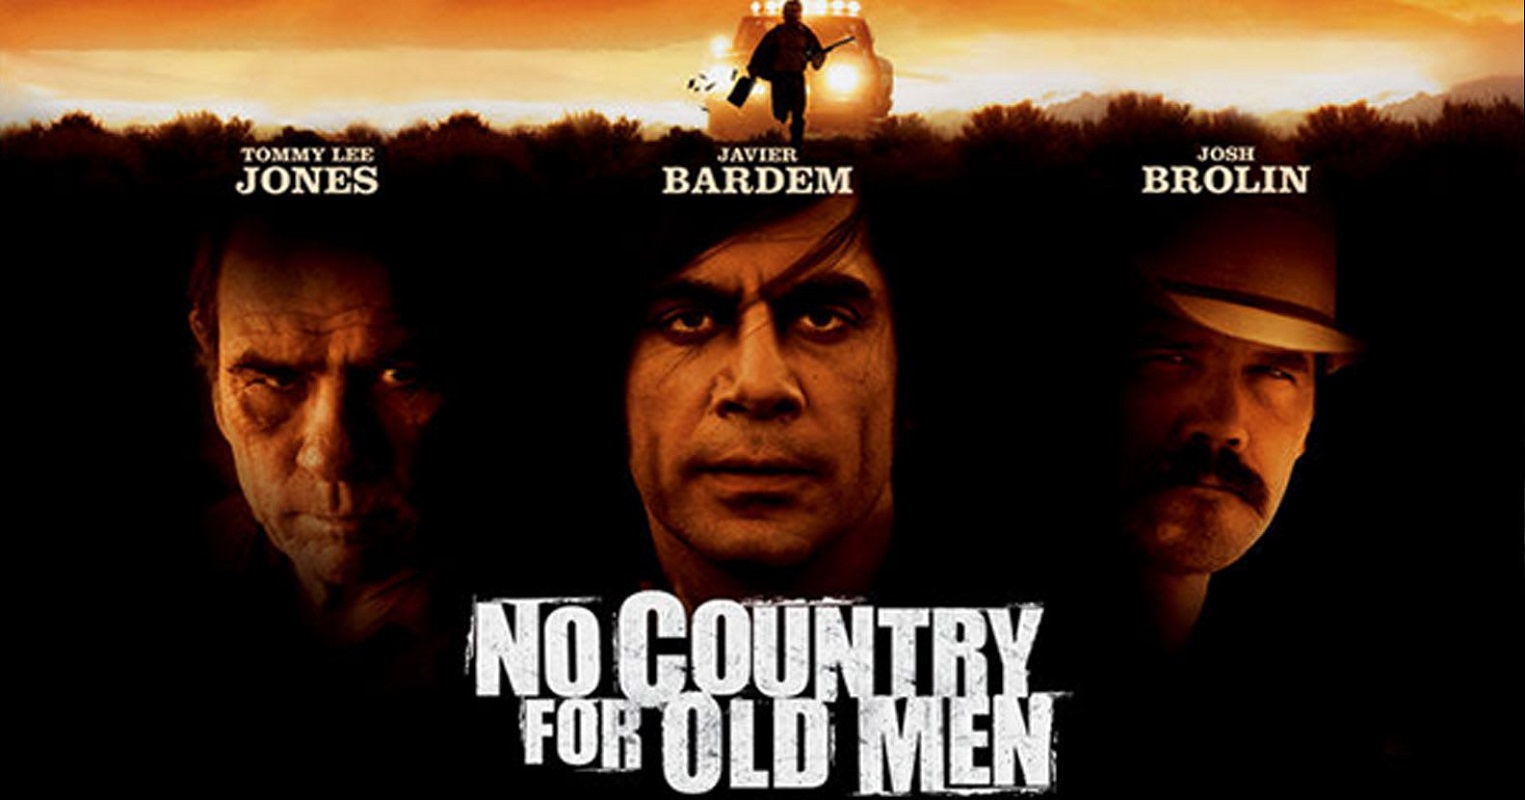 Име:  no country for old men.jpg
Разглеждания: 93
Размер:  169,6 КБ